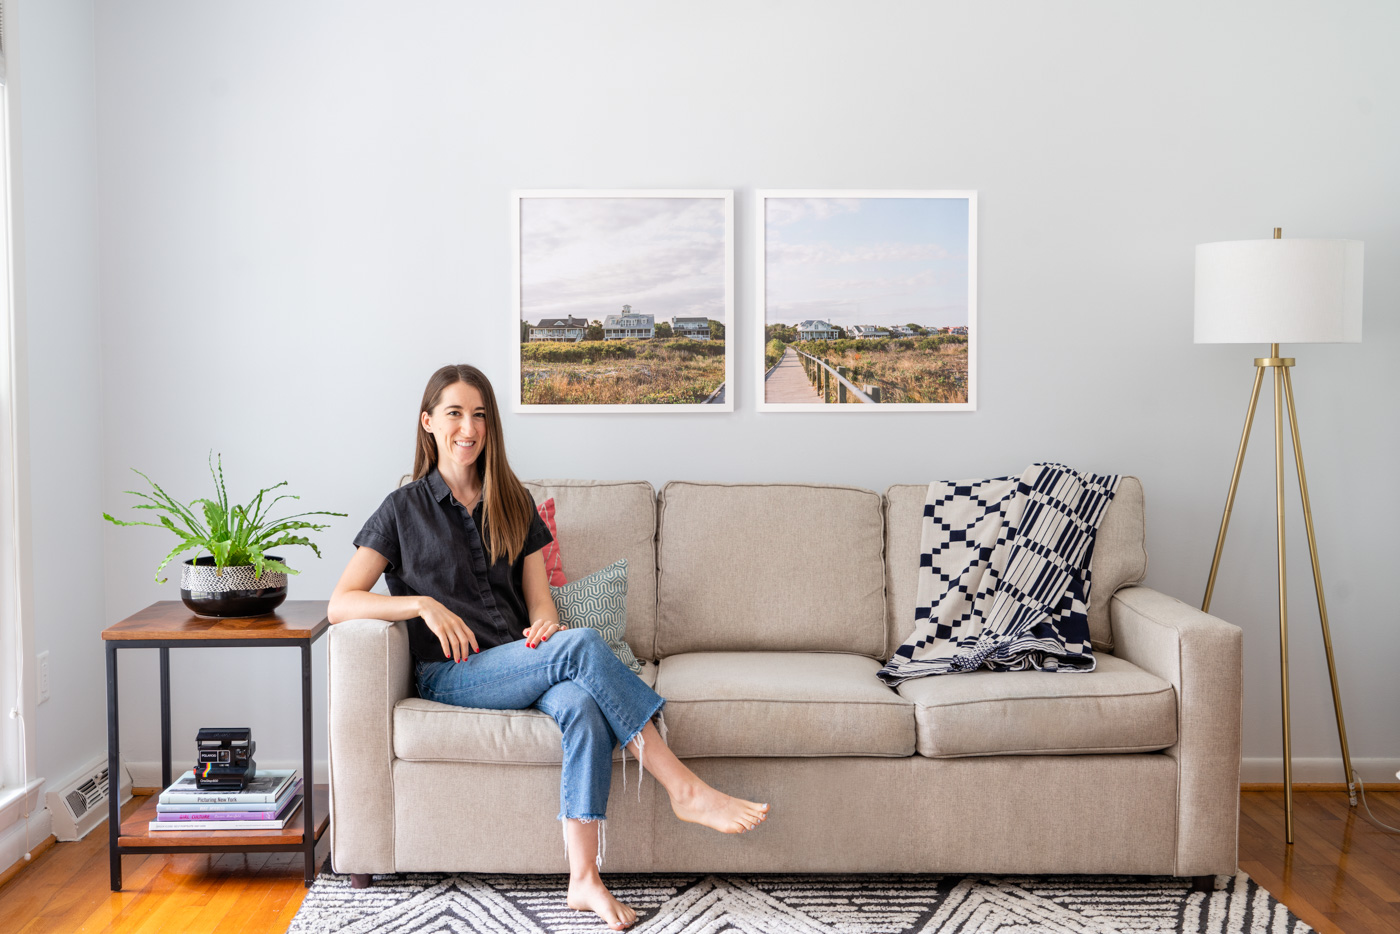 A diptych photograph of beach homes on Sullivan's Island, SC hanging over a beige couch. The photographer of the photo is sitting on the couch